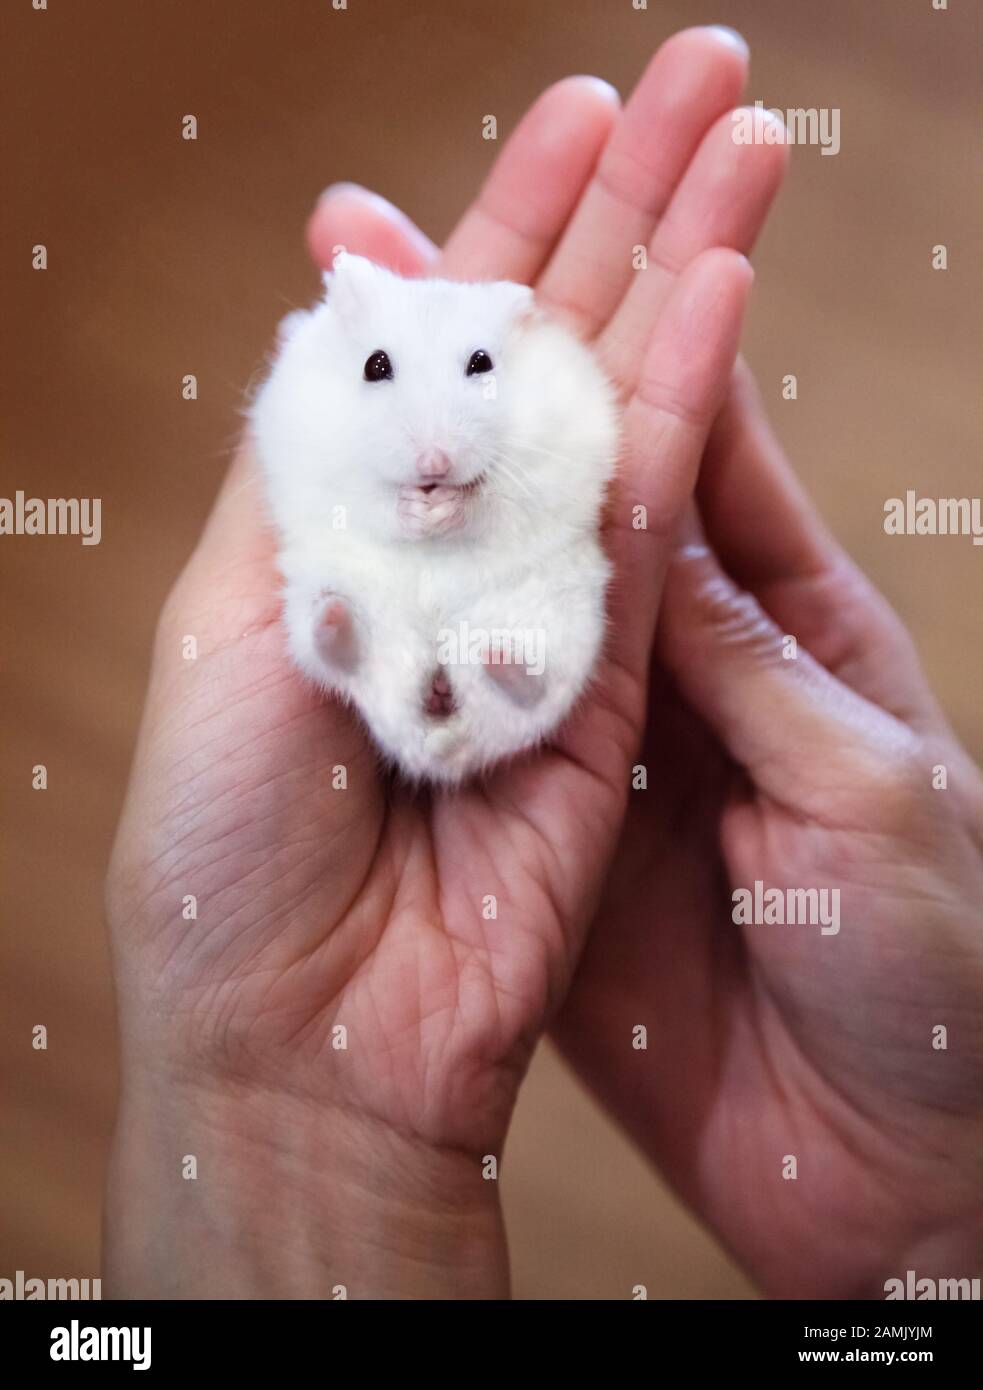 Winter White Hamster Lifespan: How Long Do They Live?